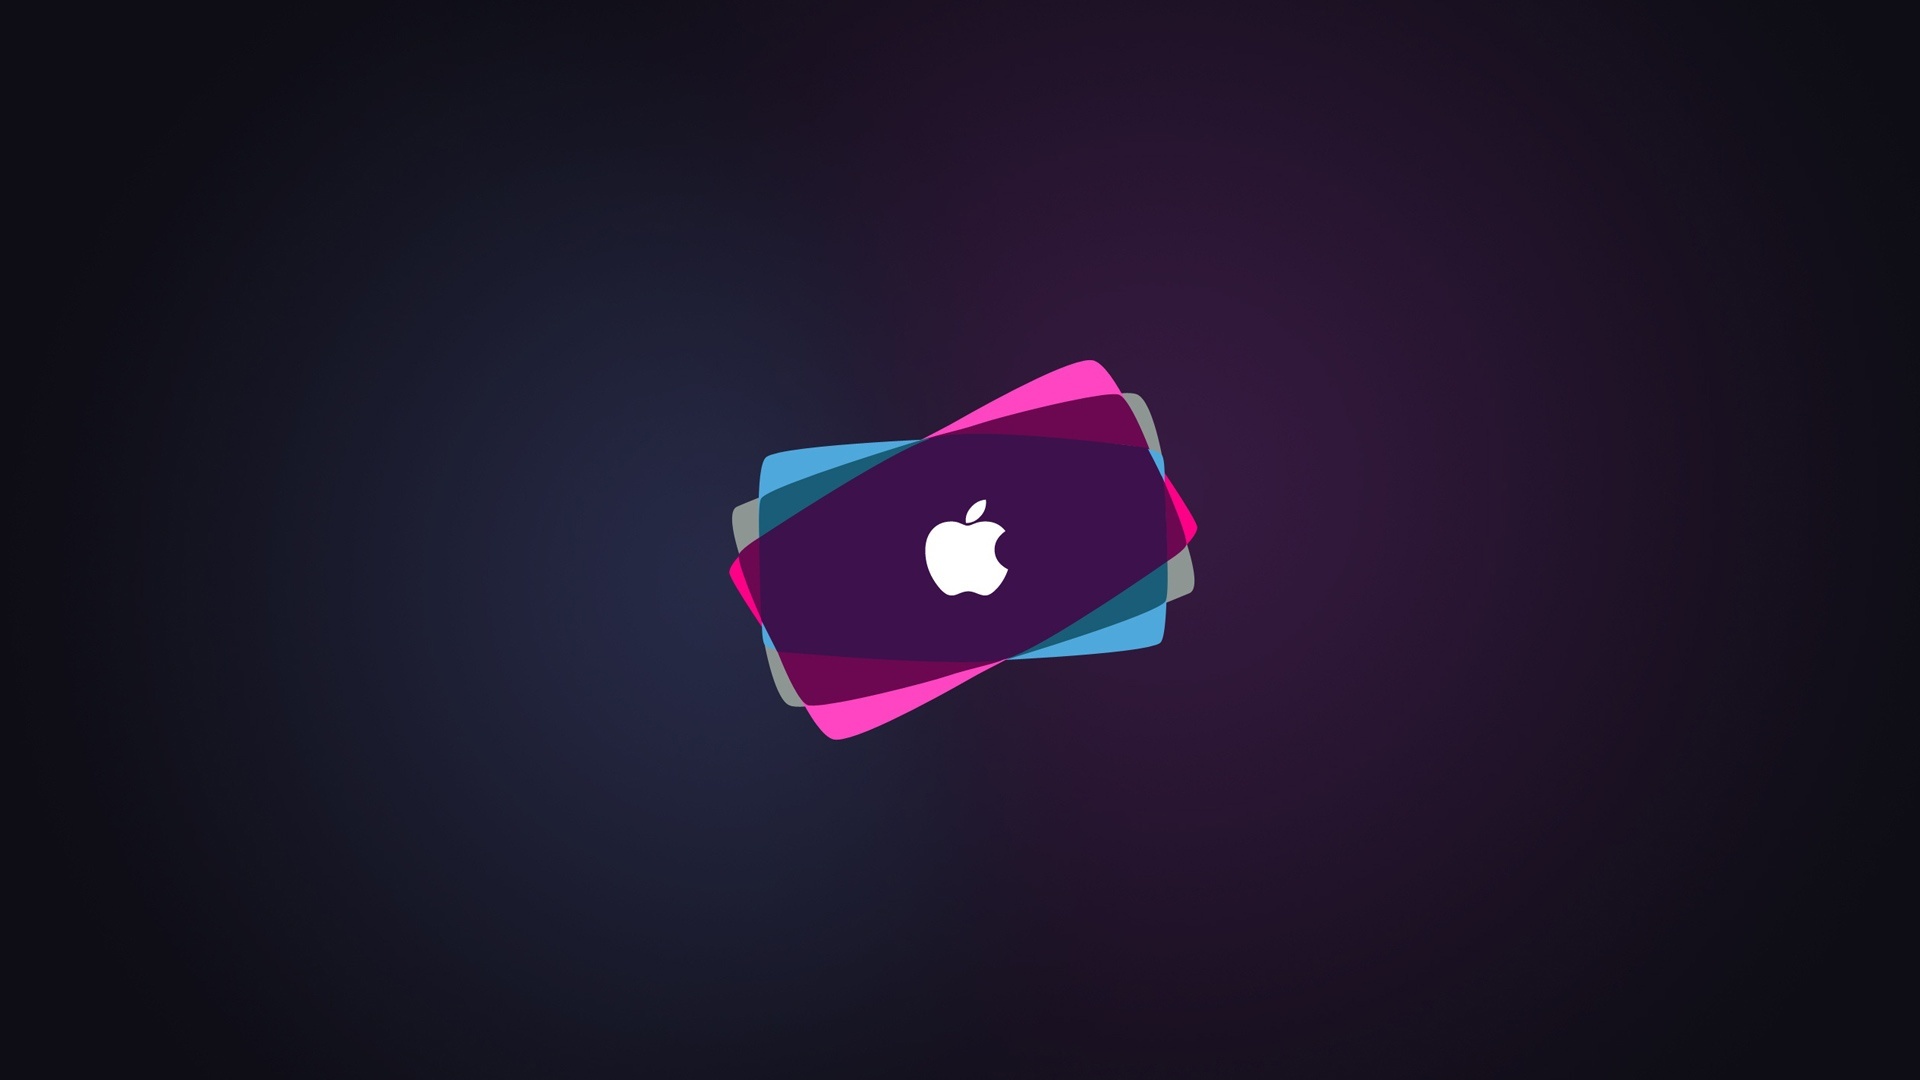 Apple LCD wallpapers | Apple LCD stock photos